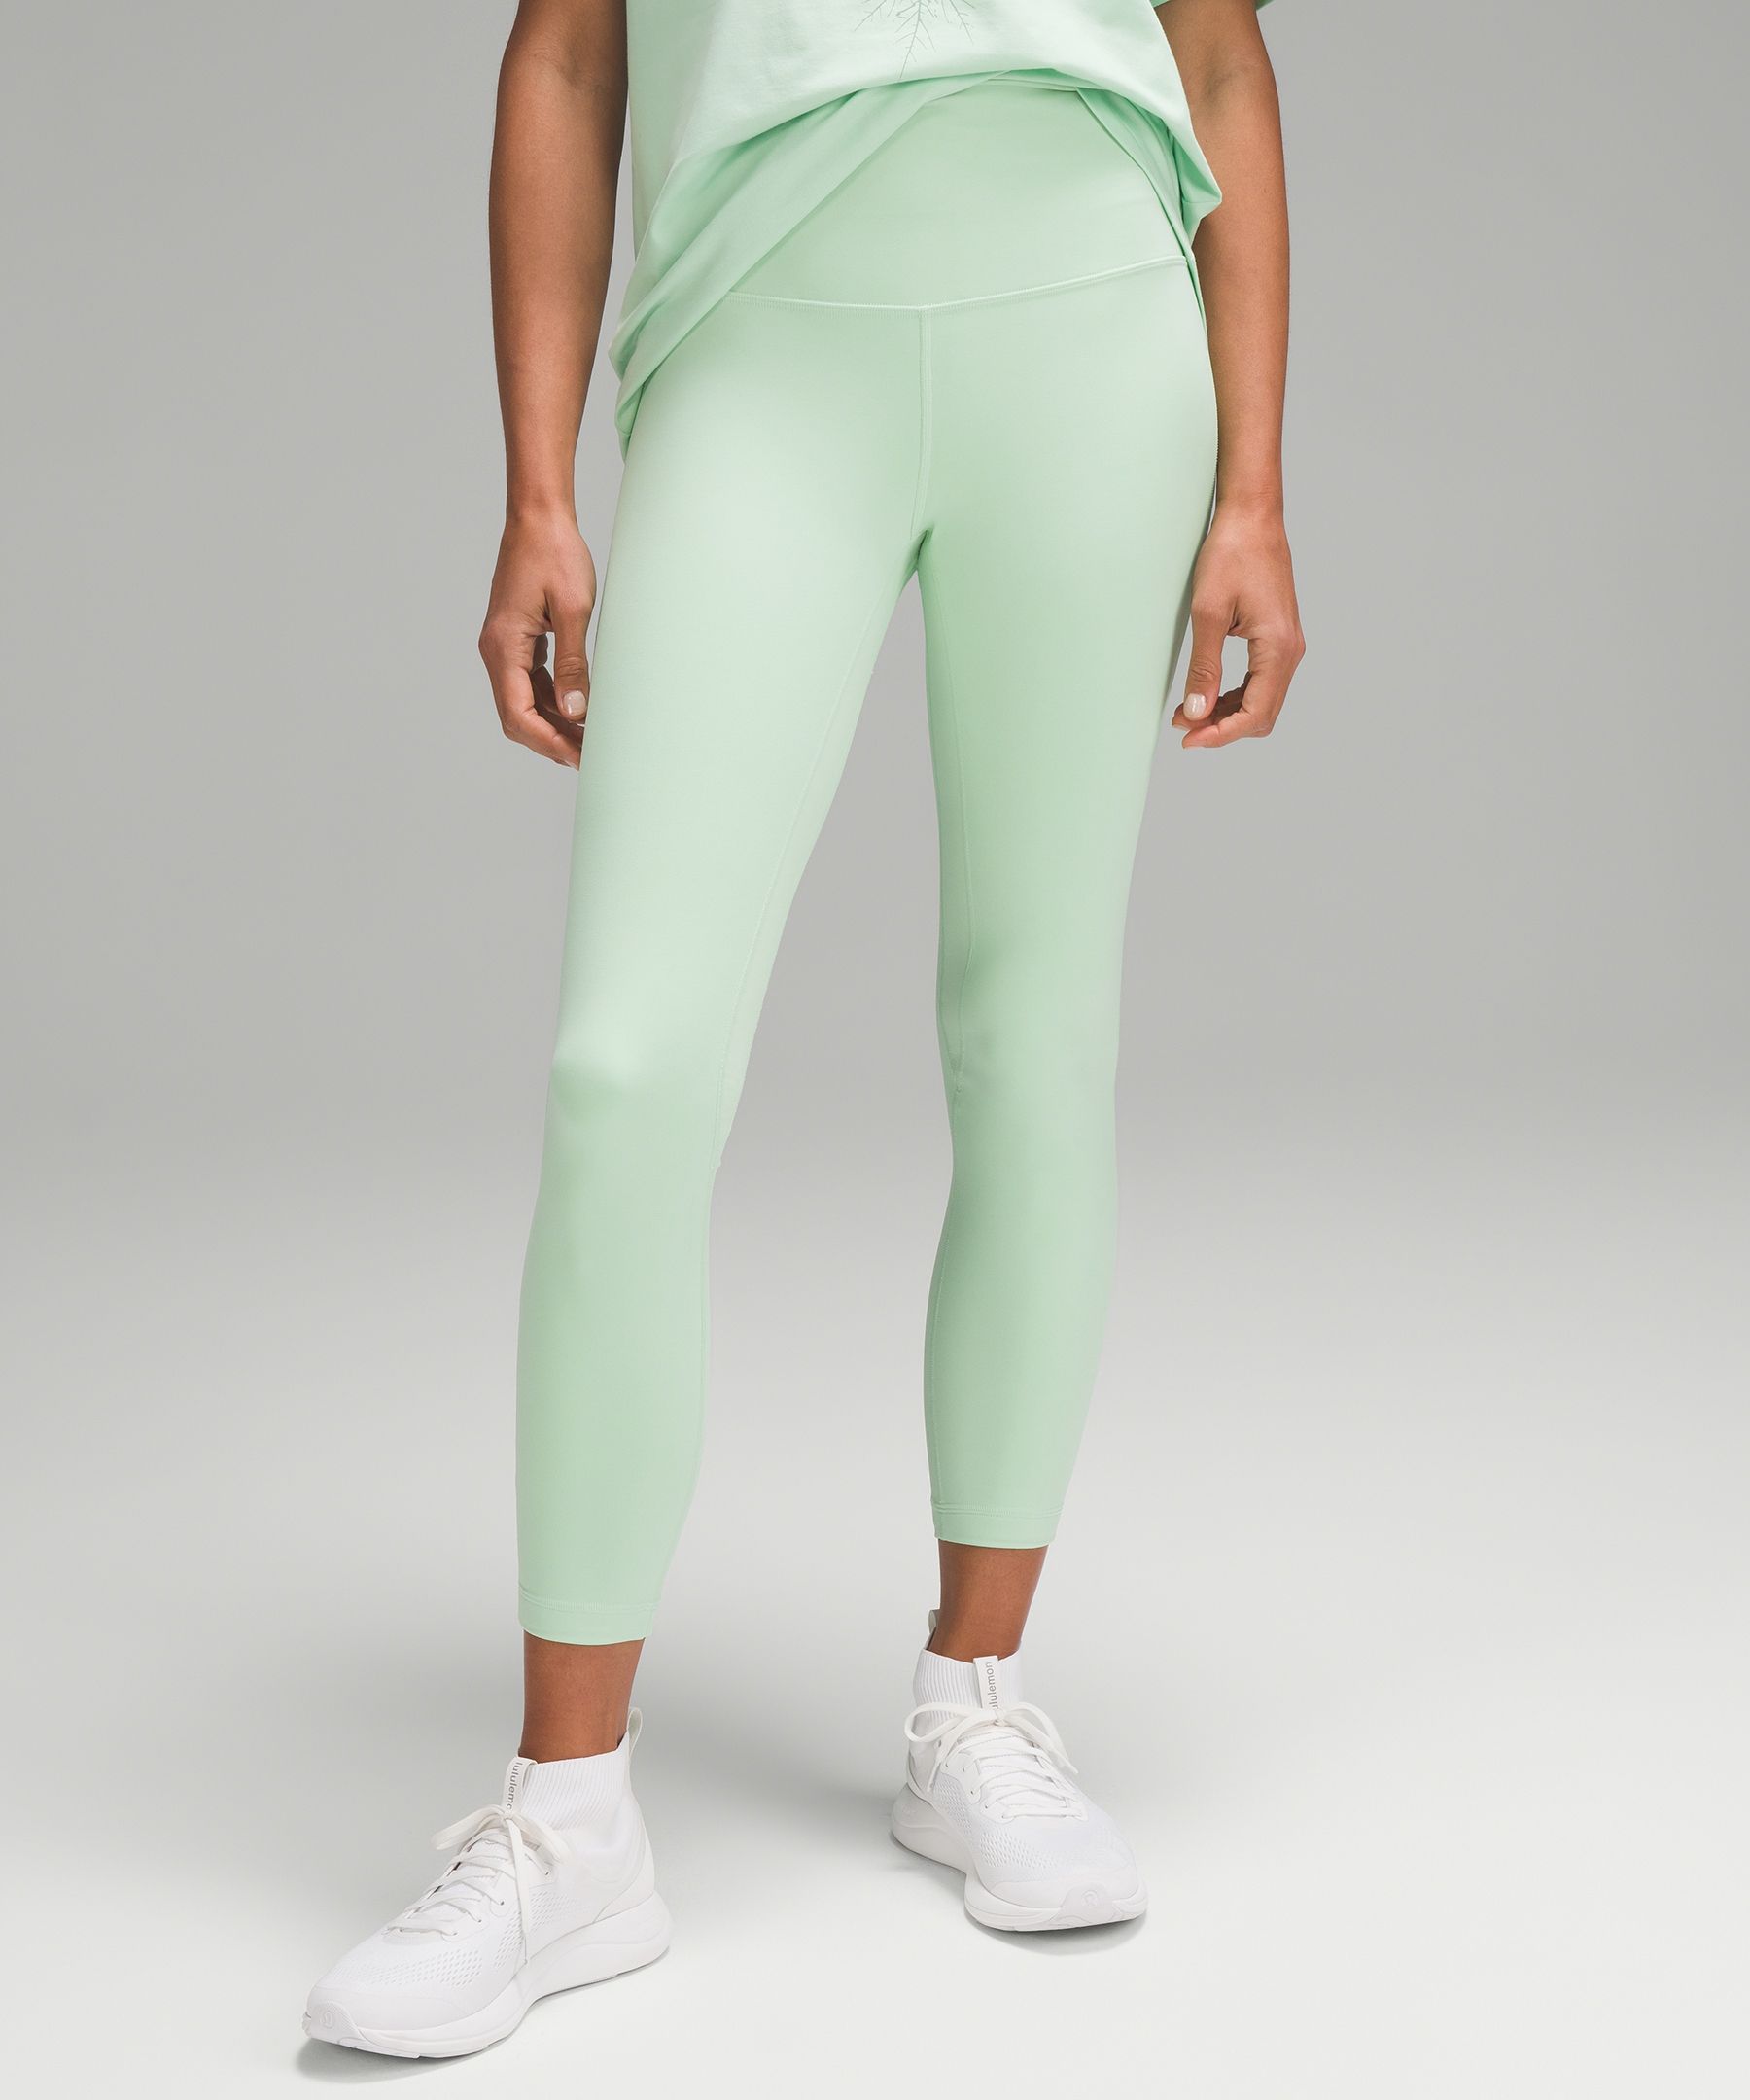 COPY - Lululemon Align High Rise Pant 25” in Maldives Green Size 20 New!